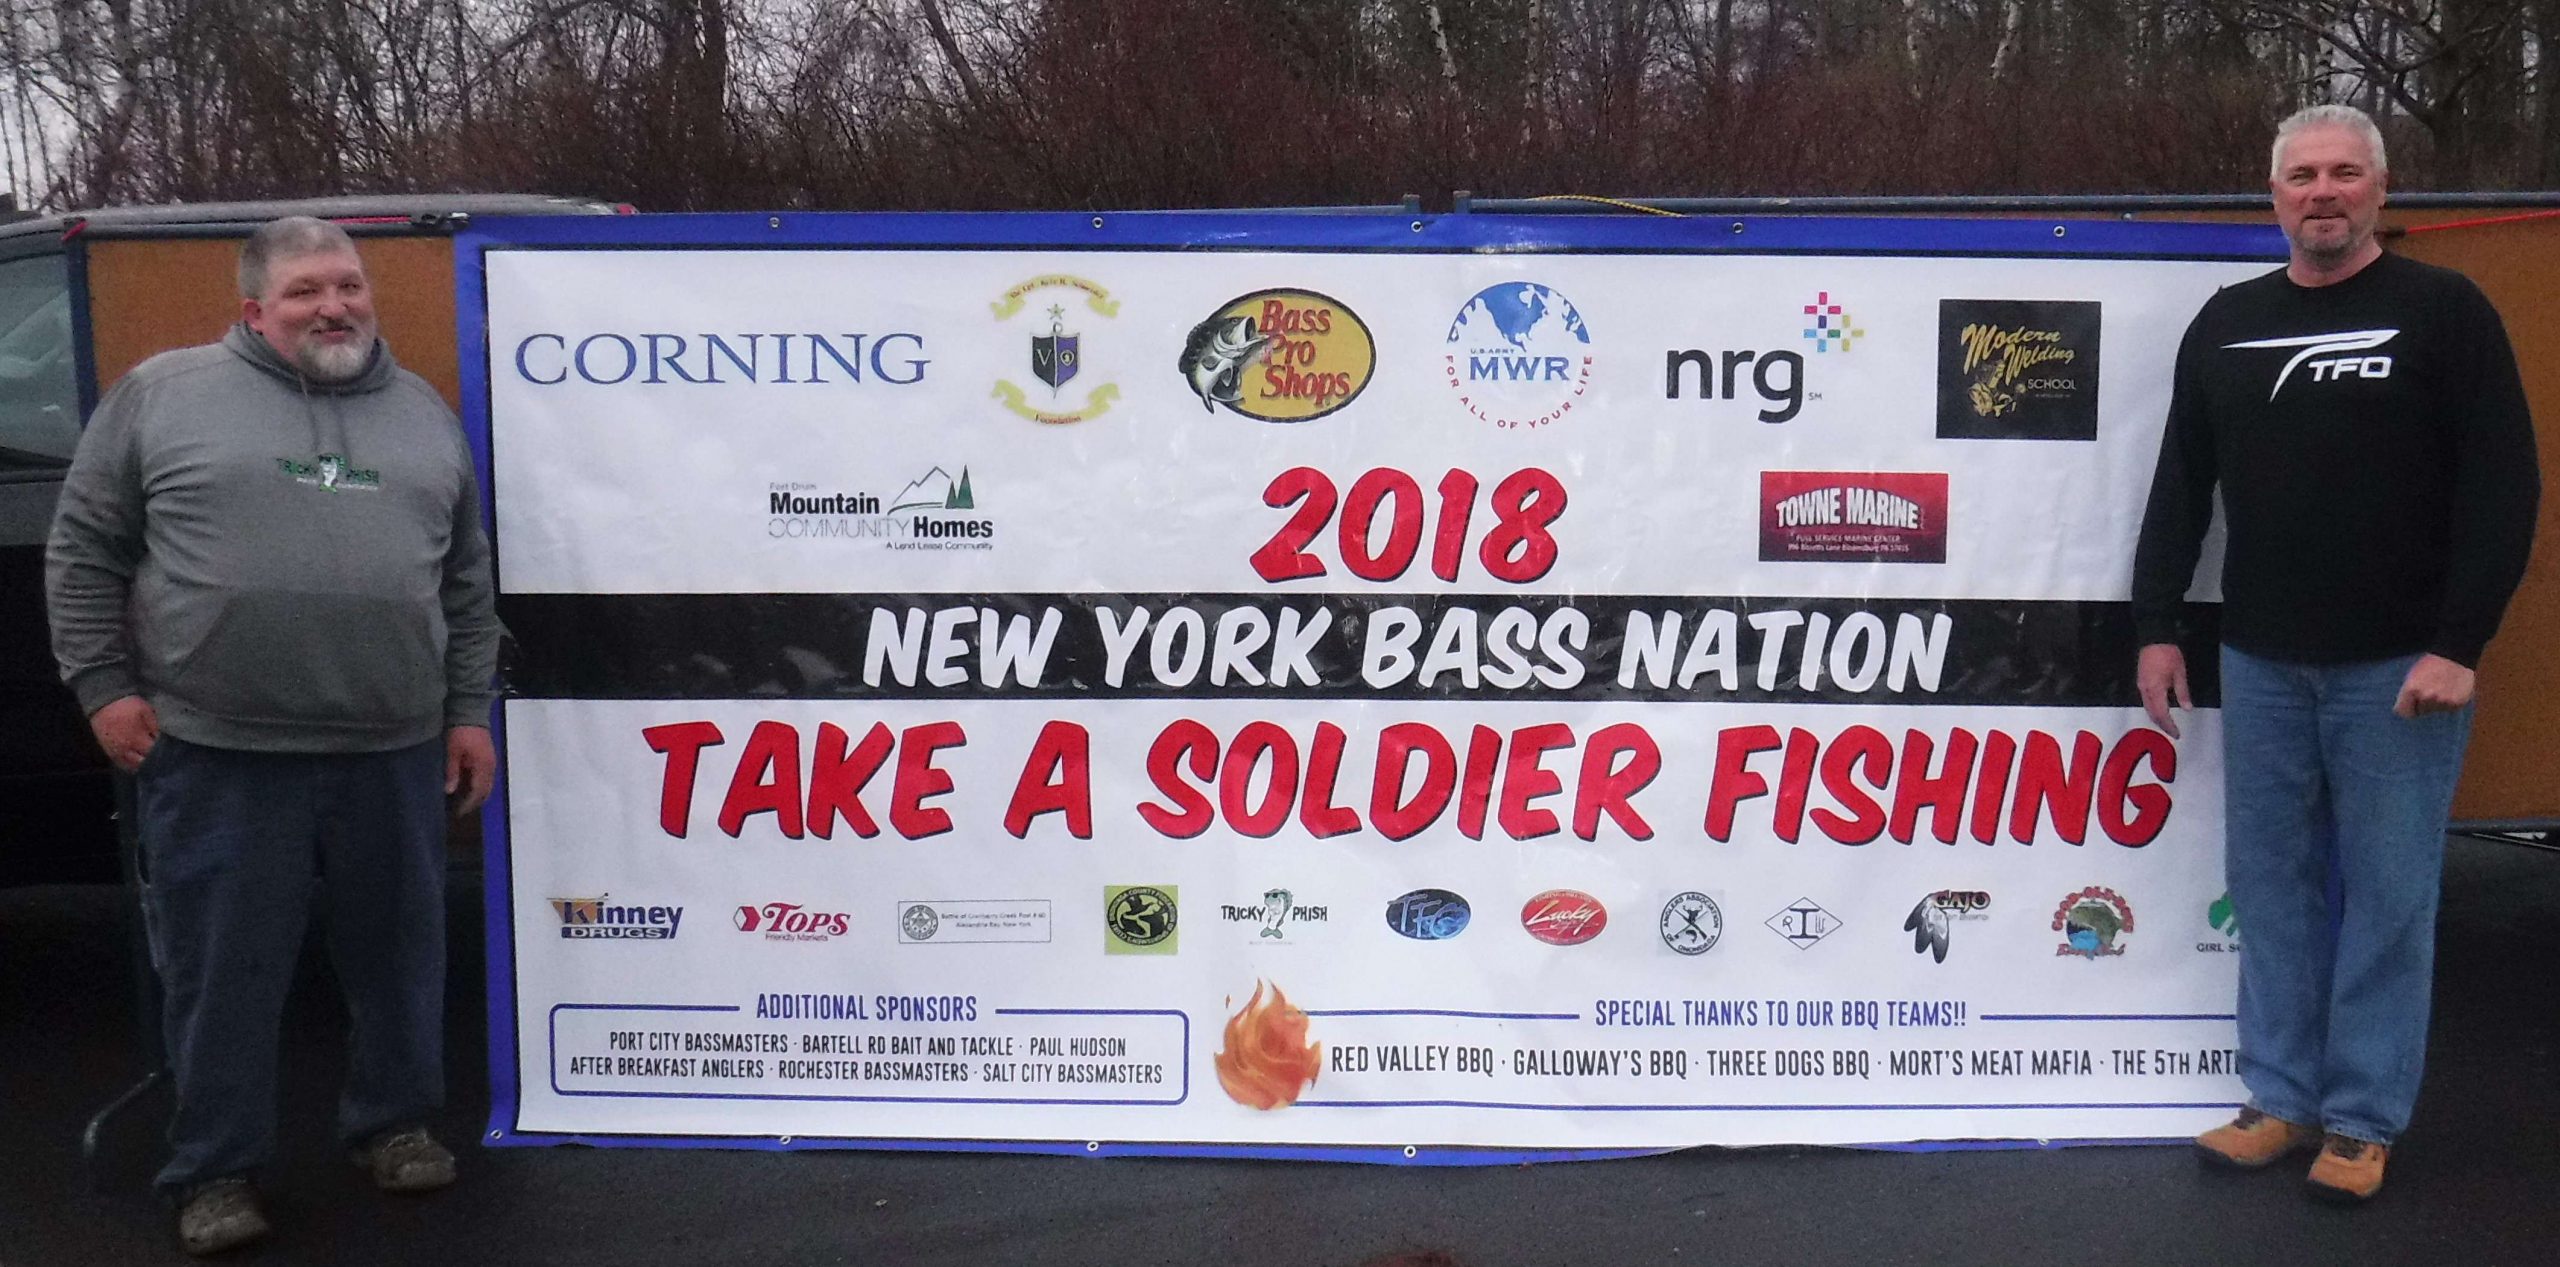 Peter Knight (President, NY B.A.S.S. Nation) on the left.  Burnie Haney (organized boaters) on the right. This event would not be not possible without the support of the community. NY DEC allowed the soldiers to fish for free and Onondaga Parks Dept opened their facilities for our use.